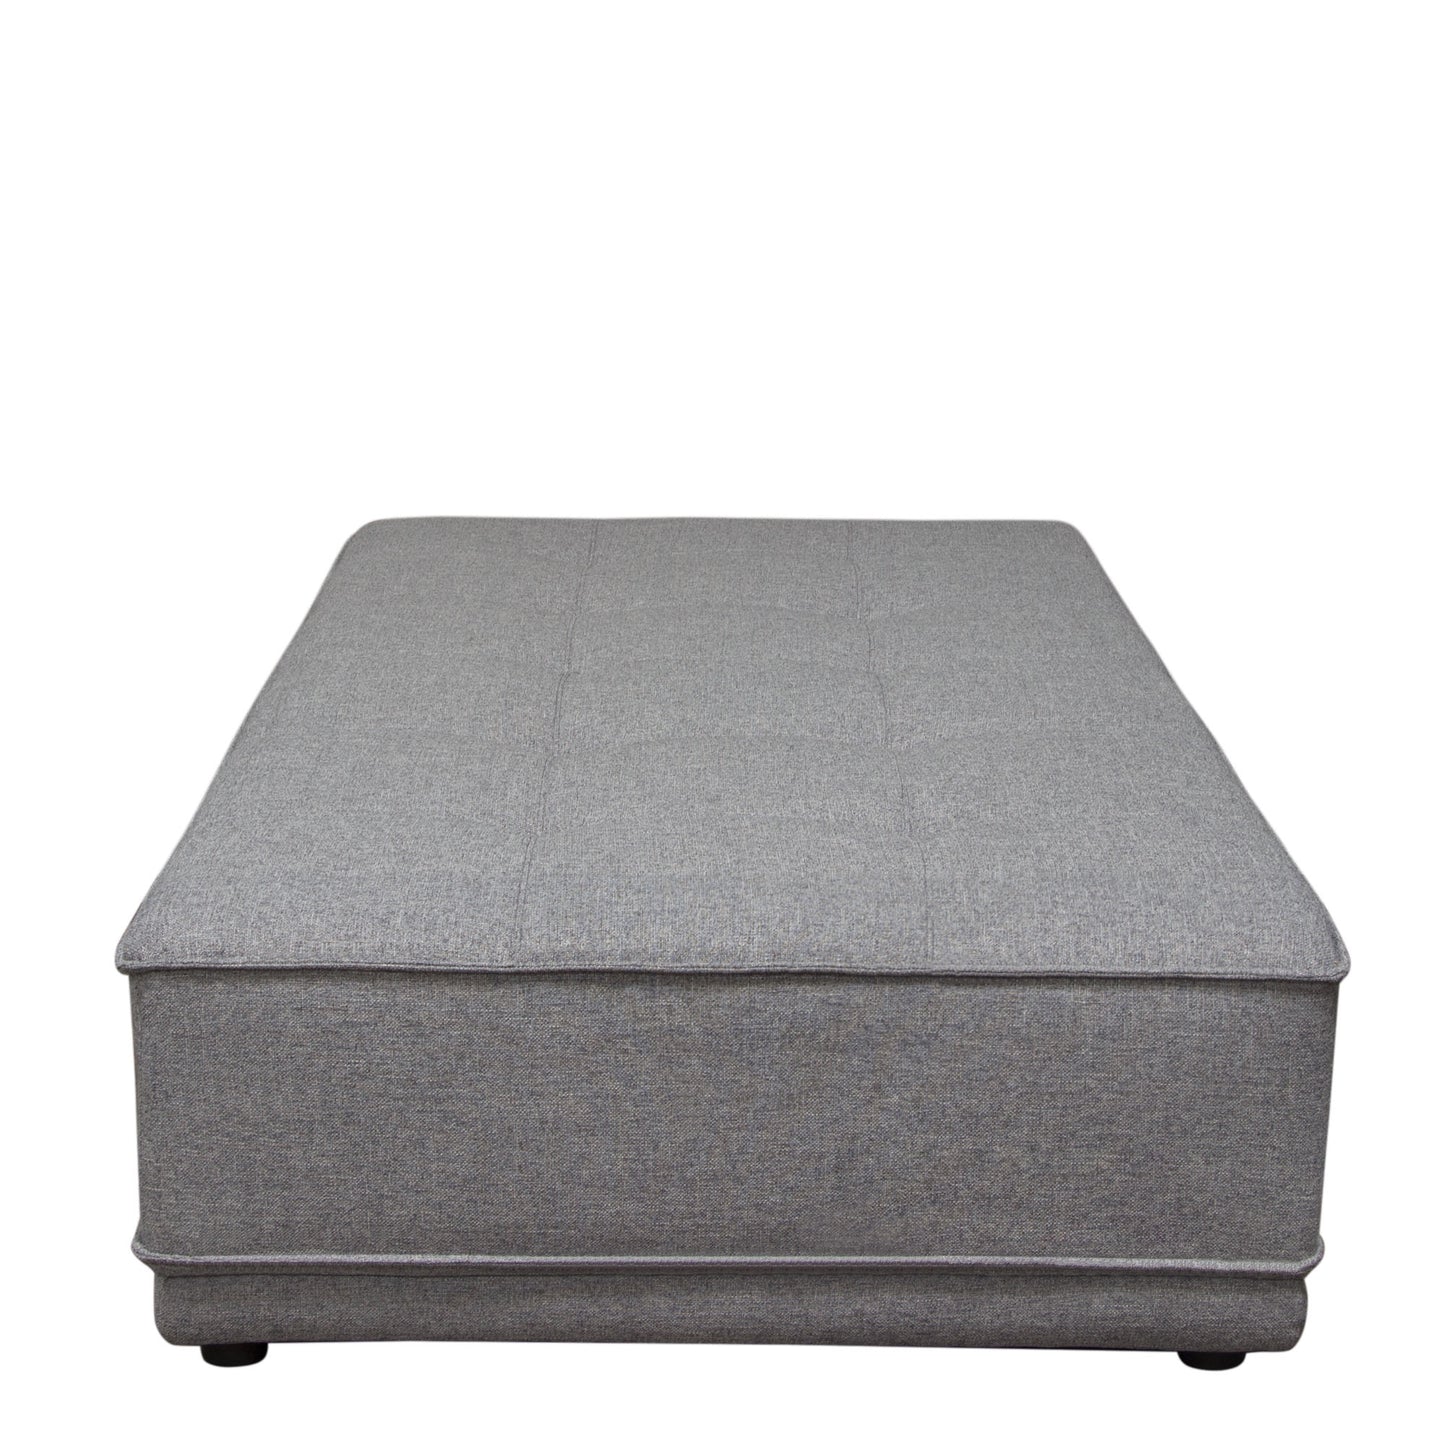 Slate Lounge Seating Platform with Moveable Backrest Supports in Grey Polyester Fabric